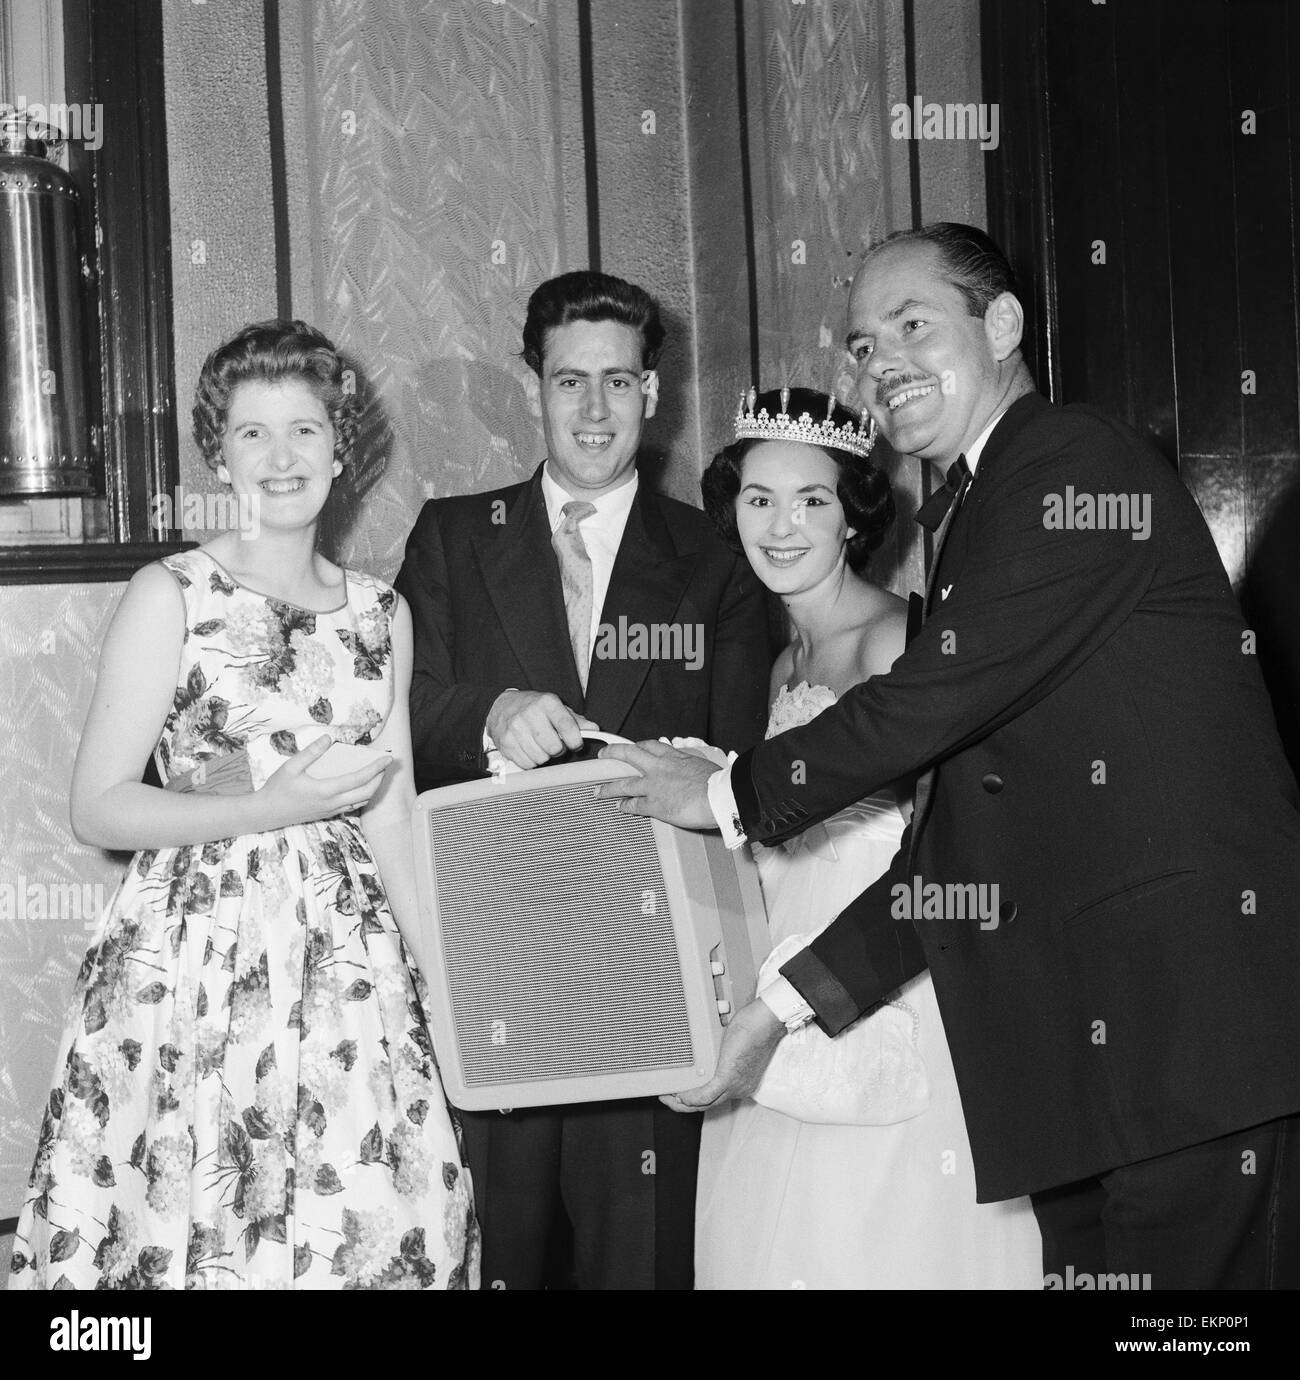 Maurice Hume and Maureen Sutton, aged 20 from Darlington, who have been engaged for three weeks, receive a prize of a record player from Peter Haigh during Blackpool week. 4th August 1959. *** Local Caption *** Maureen Hume Stock Photo